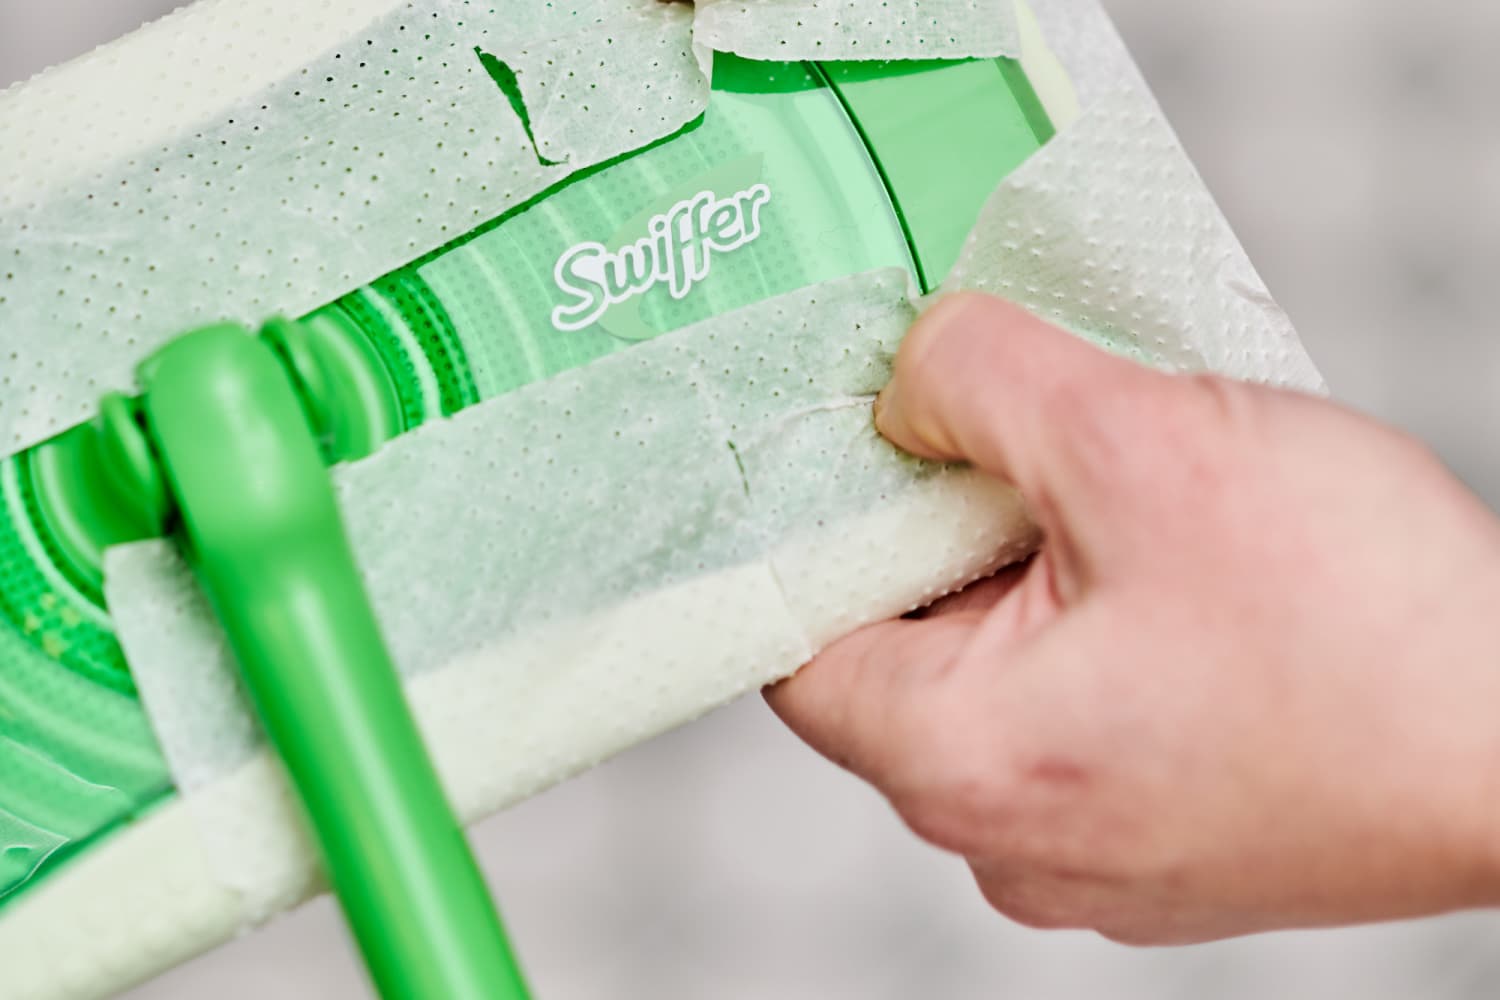 Things You Should Never Clean with a Swiffer